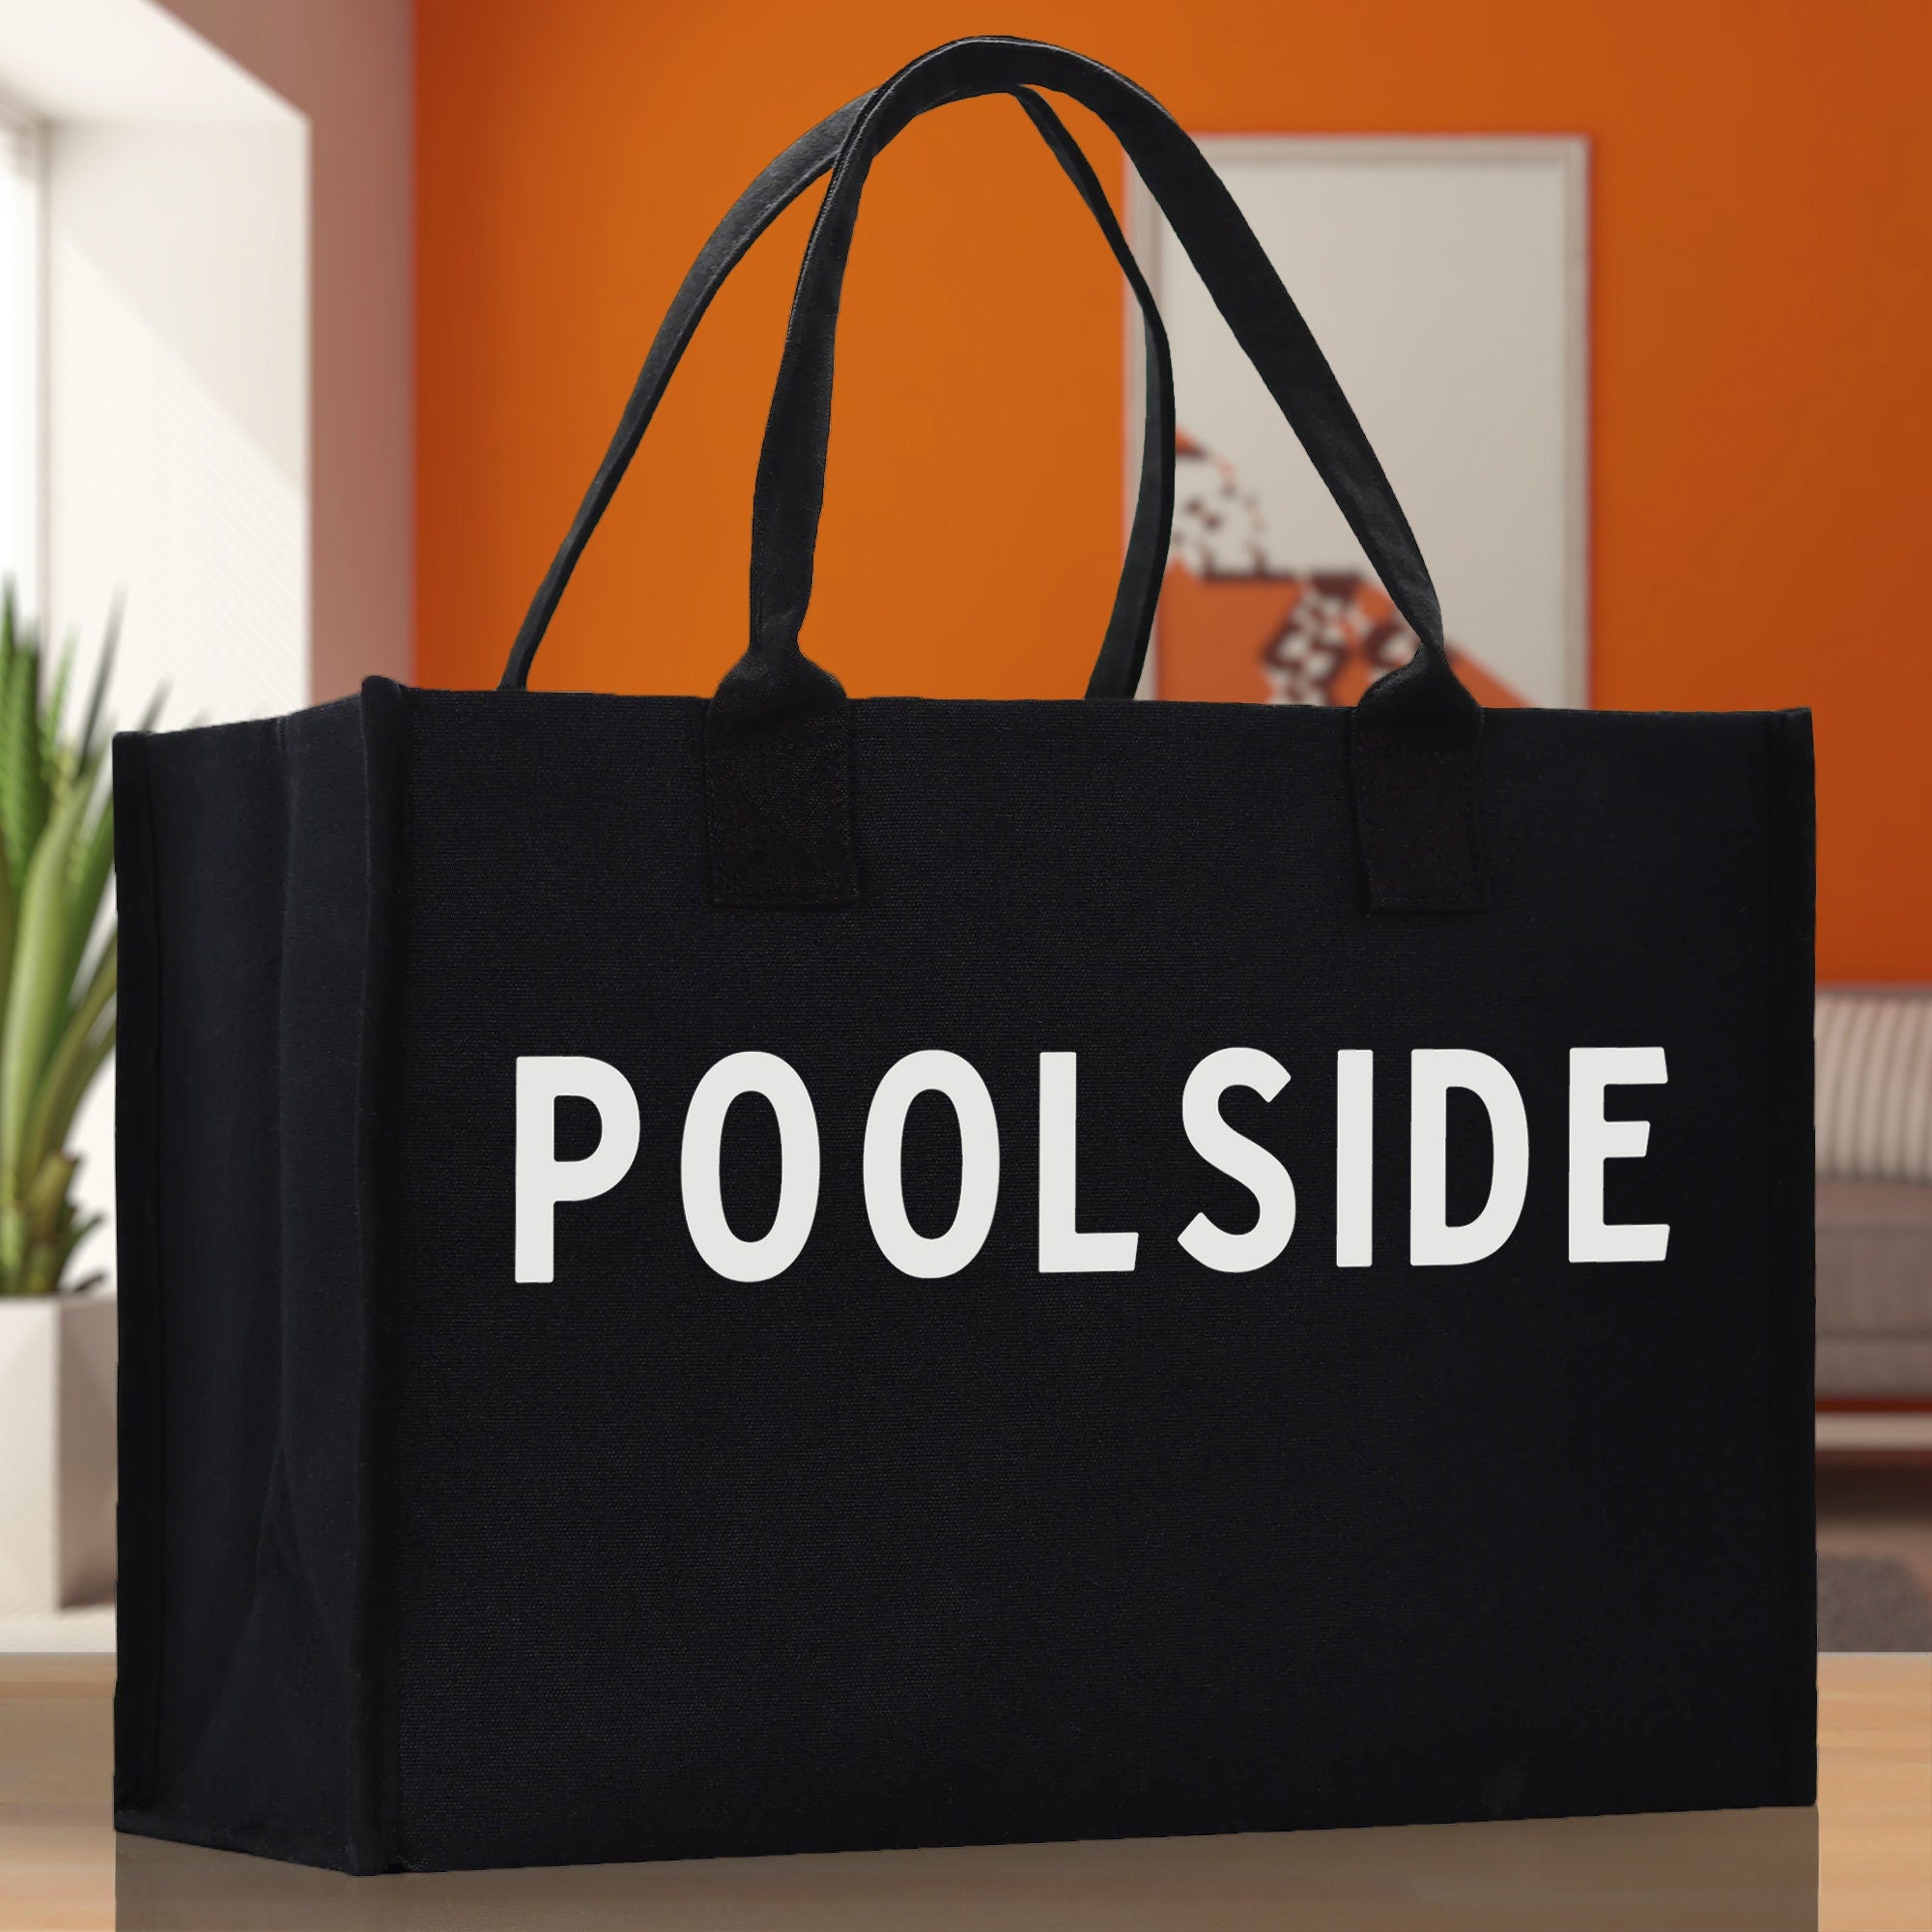 Poolside Cotton Canvas Chic Beach Tote Bag Multipurpose Tote Weekender Tote Gift for Her Outdoor Tote Vacation Tote Large Beach Bag